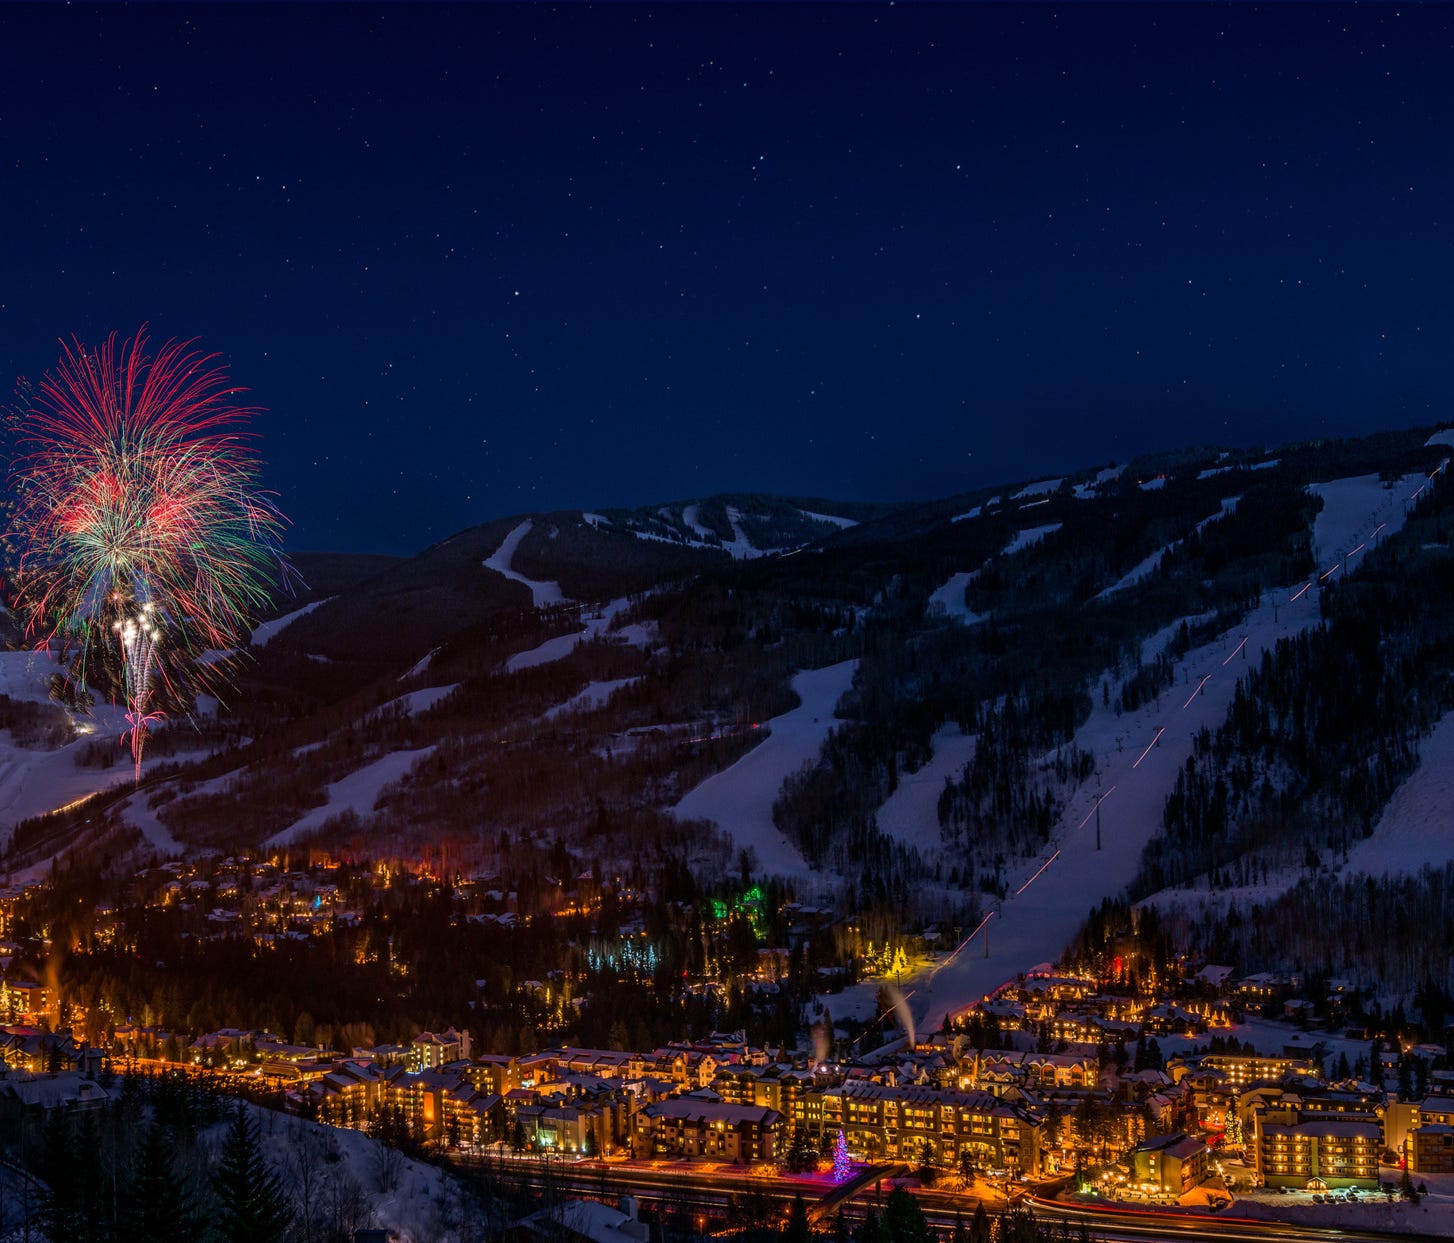 While Vail looks like one massive ski town, it is actually four adjacent base villages that sit close to one another along the long frontside of huge Vail Mountain, one of the largest single mountain ski resorts in the world. And sometimes they have 